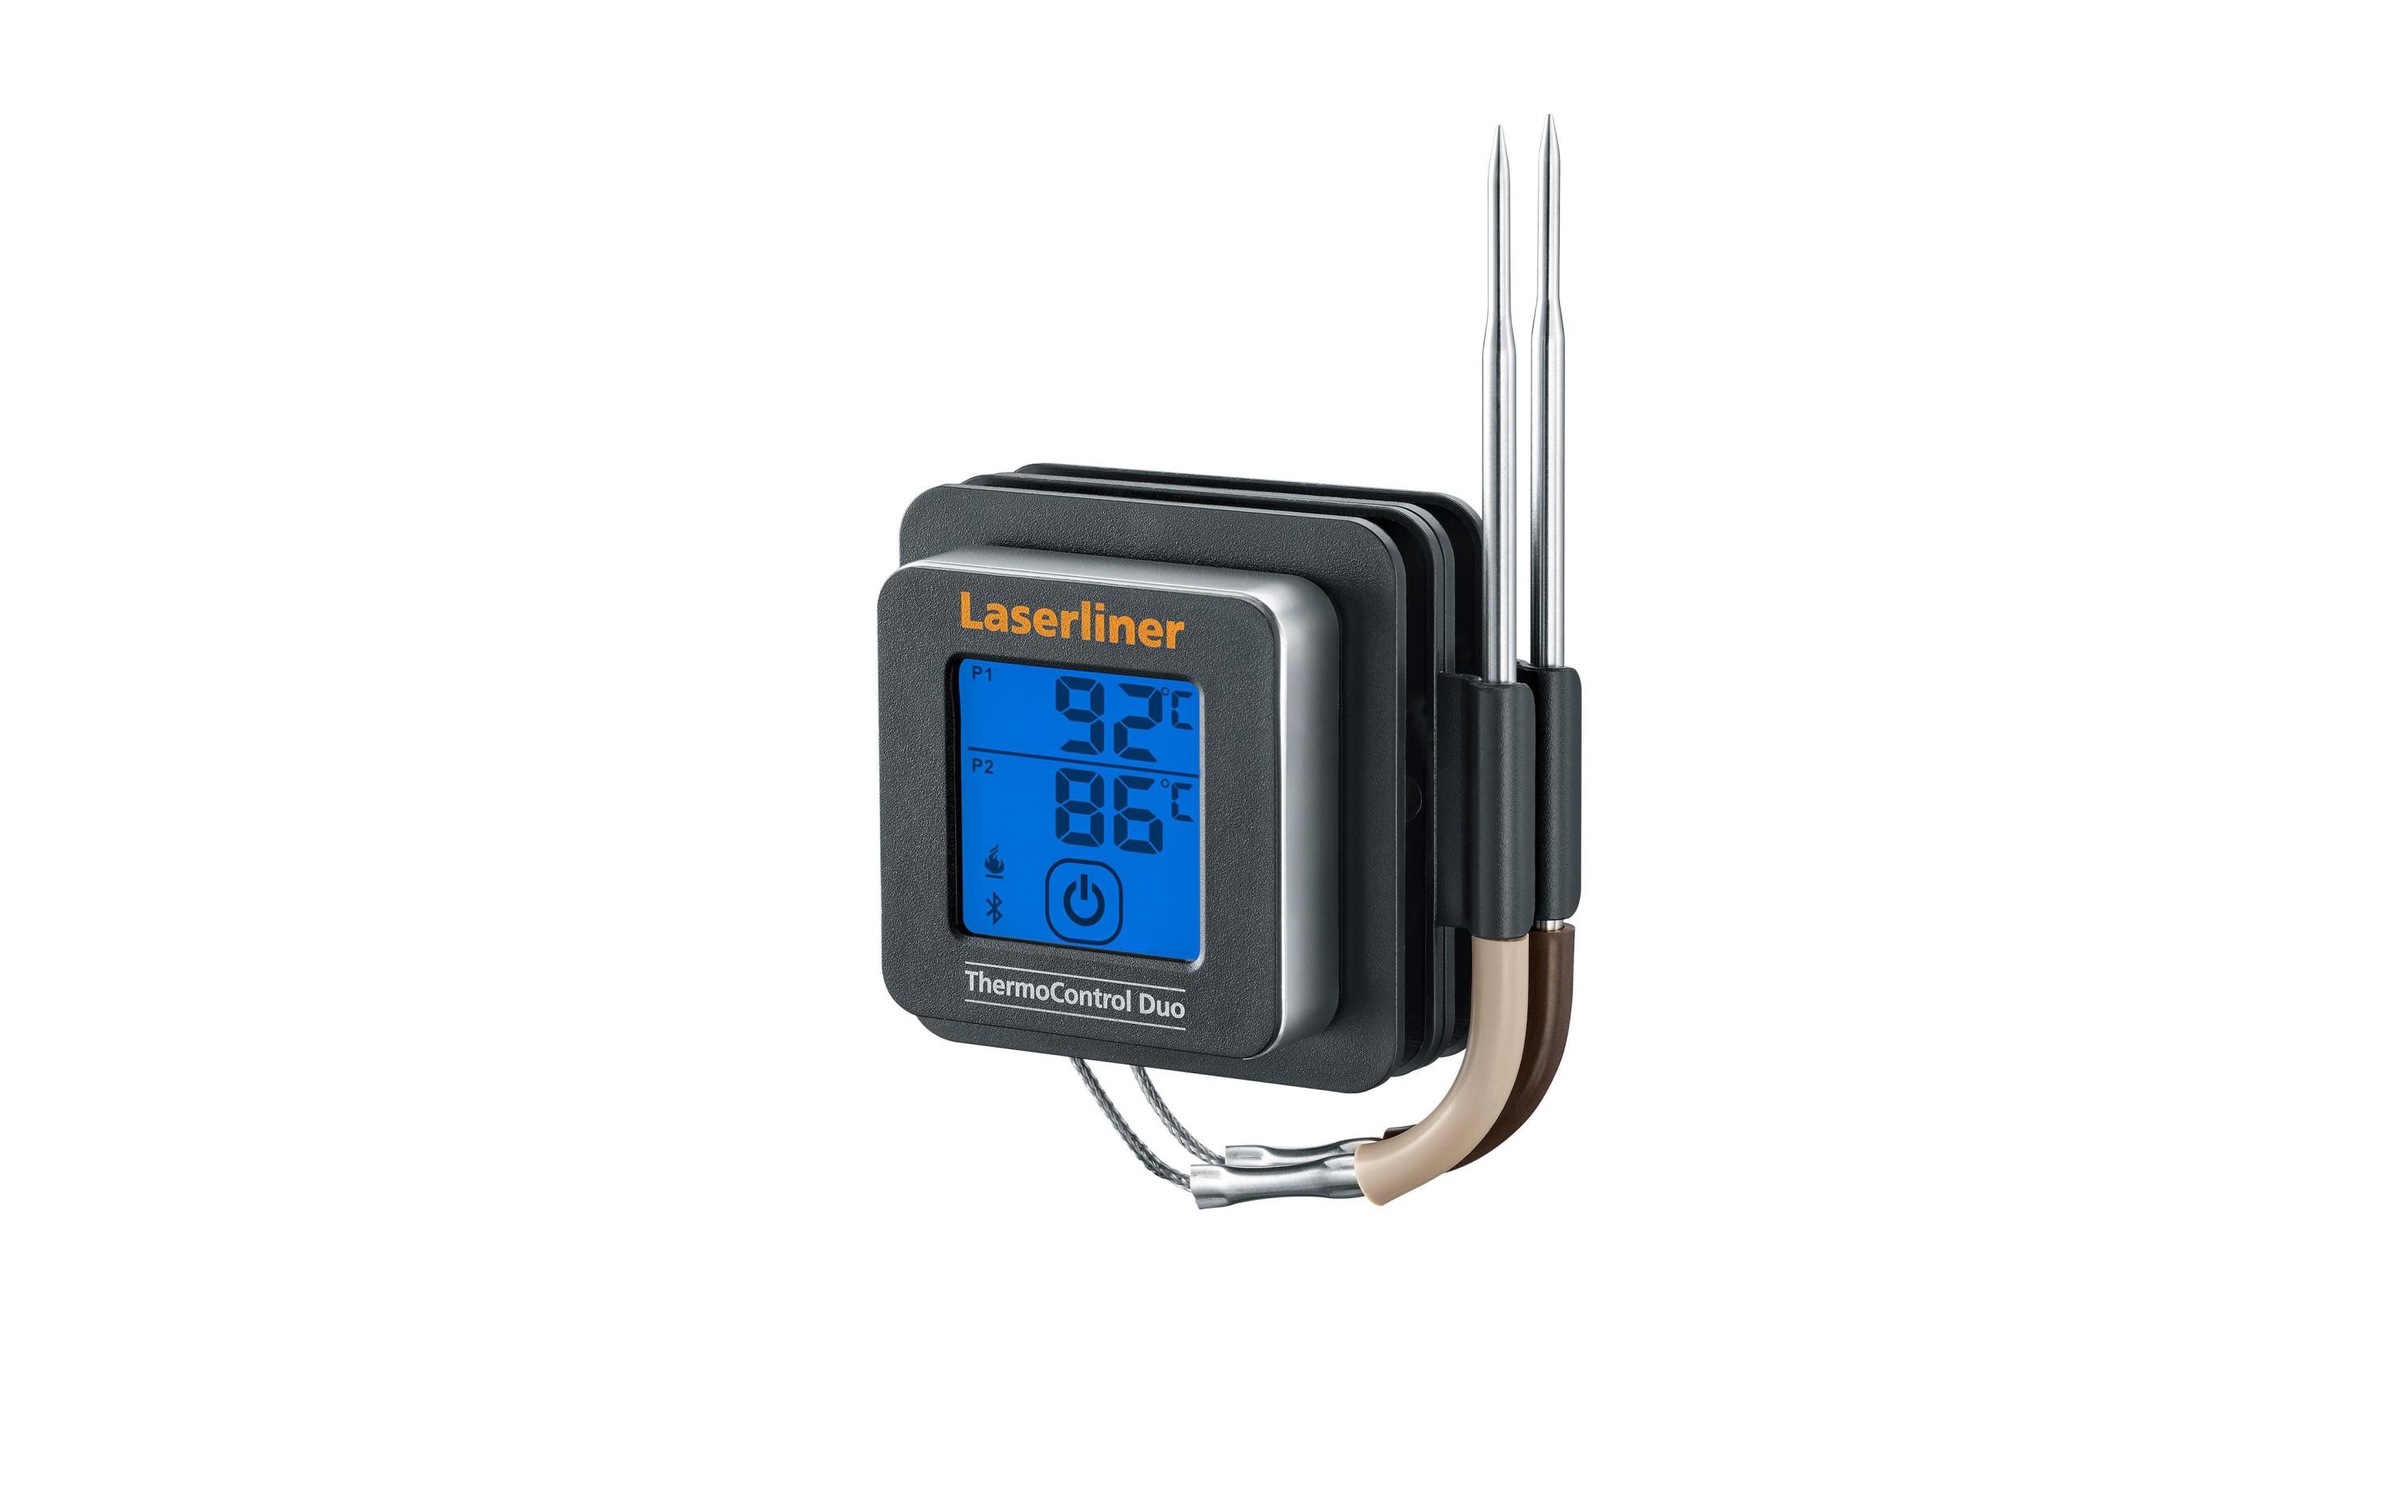 Bratenthermometer »Laserliner Therm«